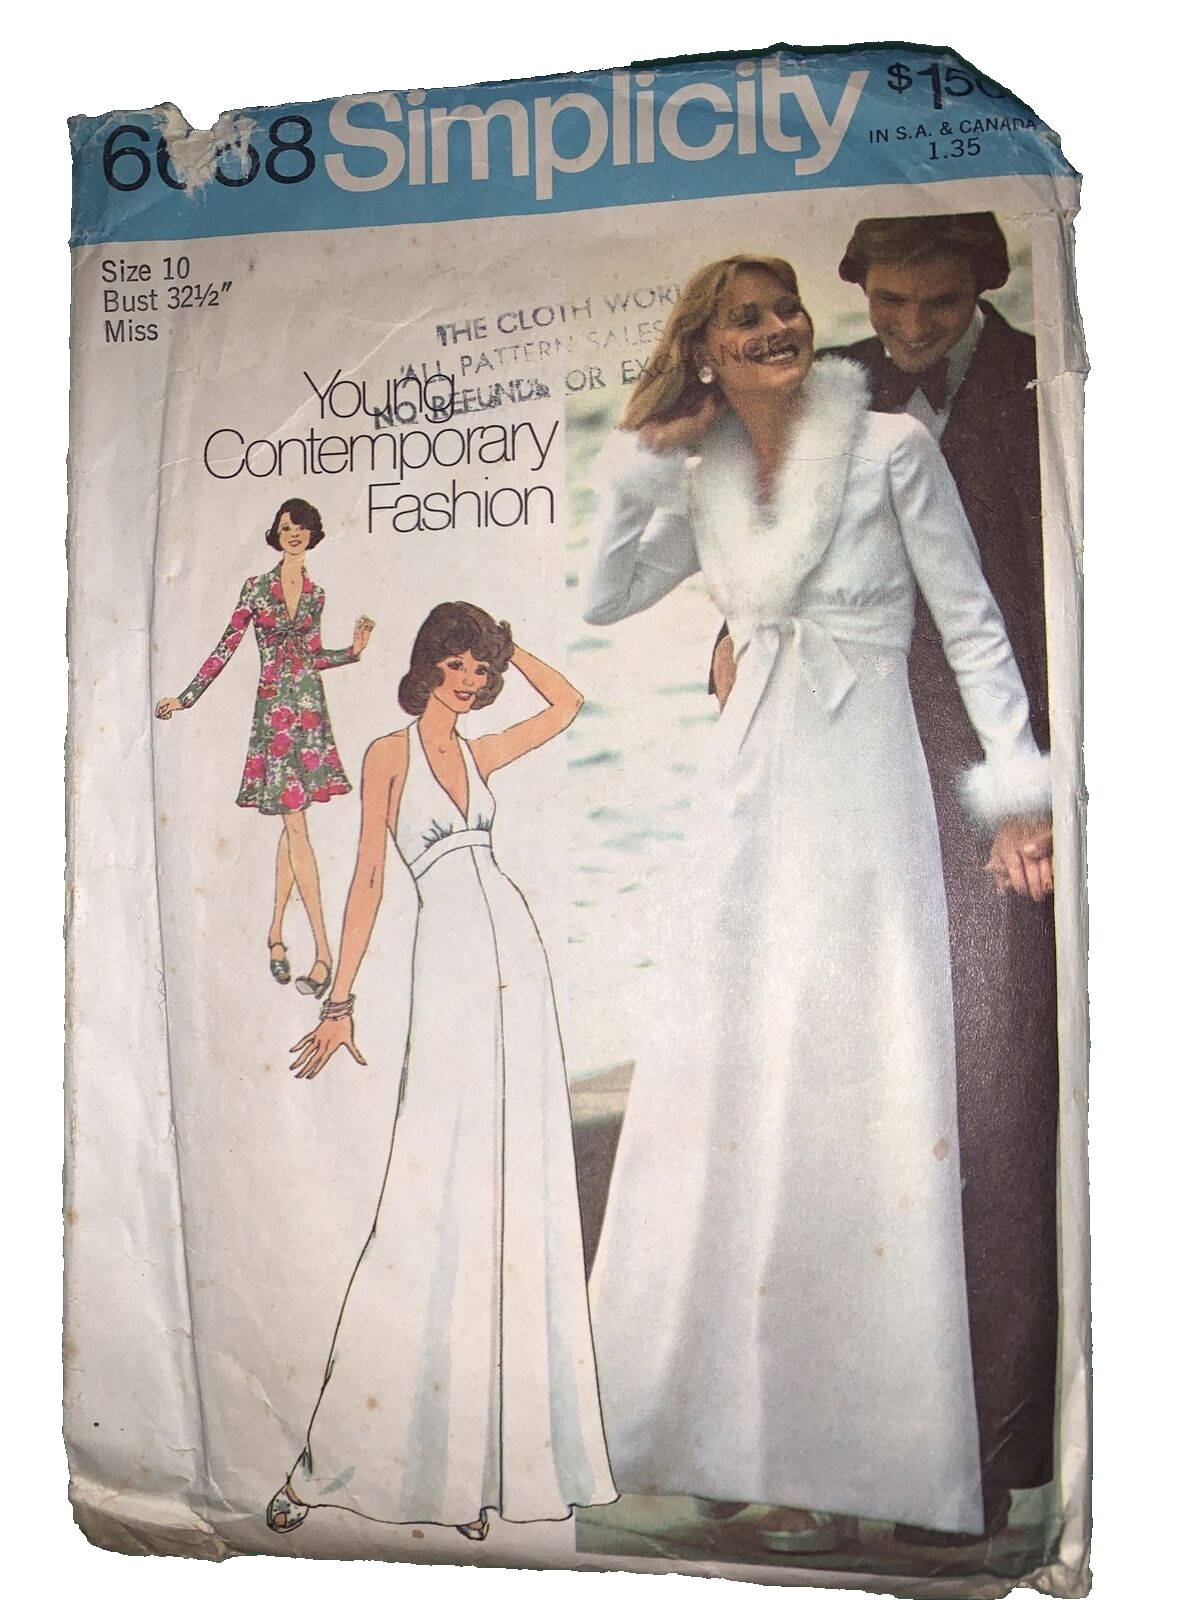 Simplicity Young Contemporary Fashion Dress w Jacket Pattern #6658 Size 10 - $3.84